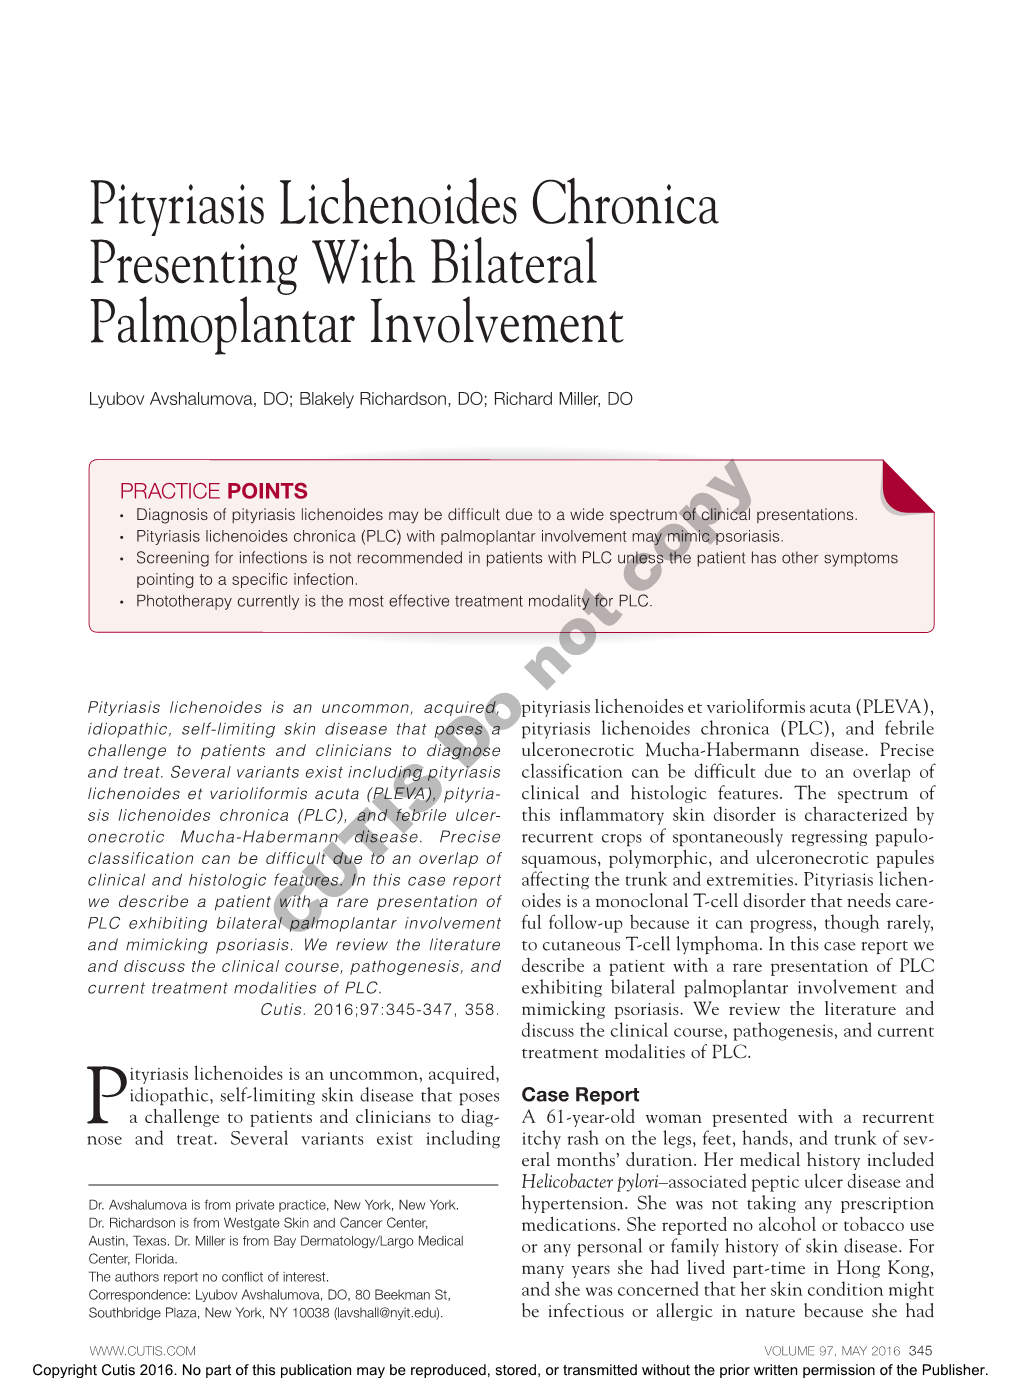 Pityriasis Lichenoides Chronica Presenting with Bilateral Palmoplantar Involvement